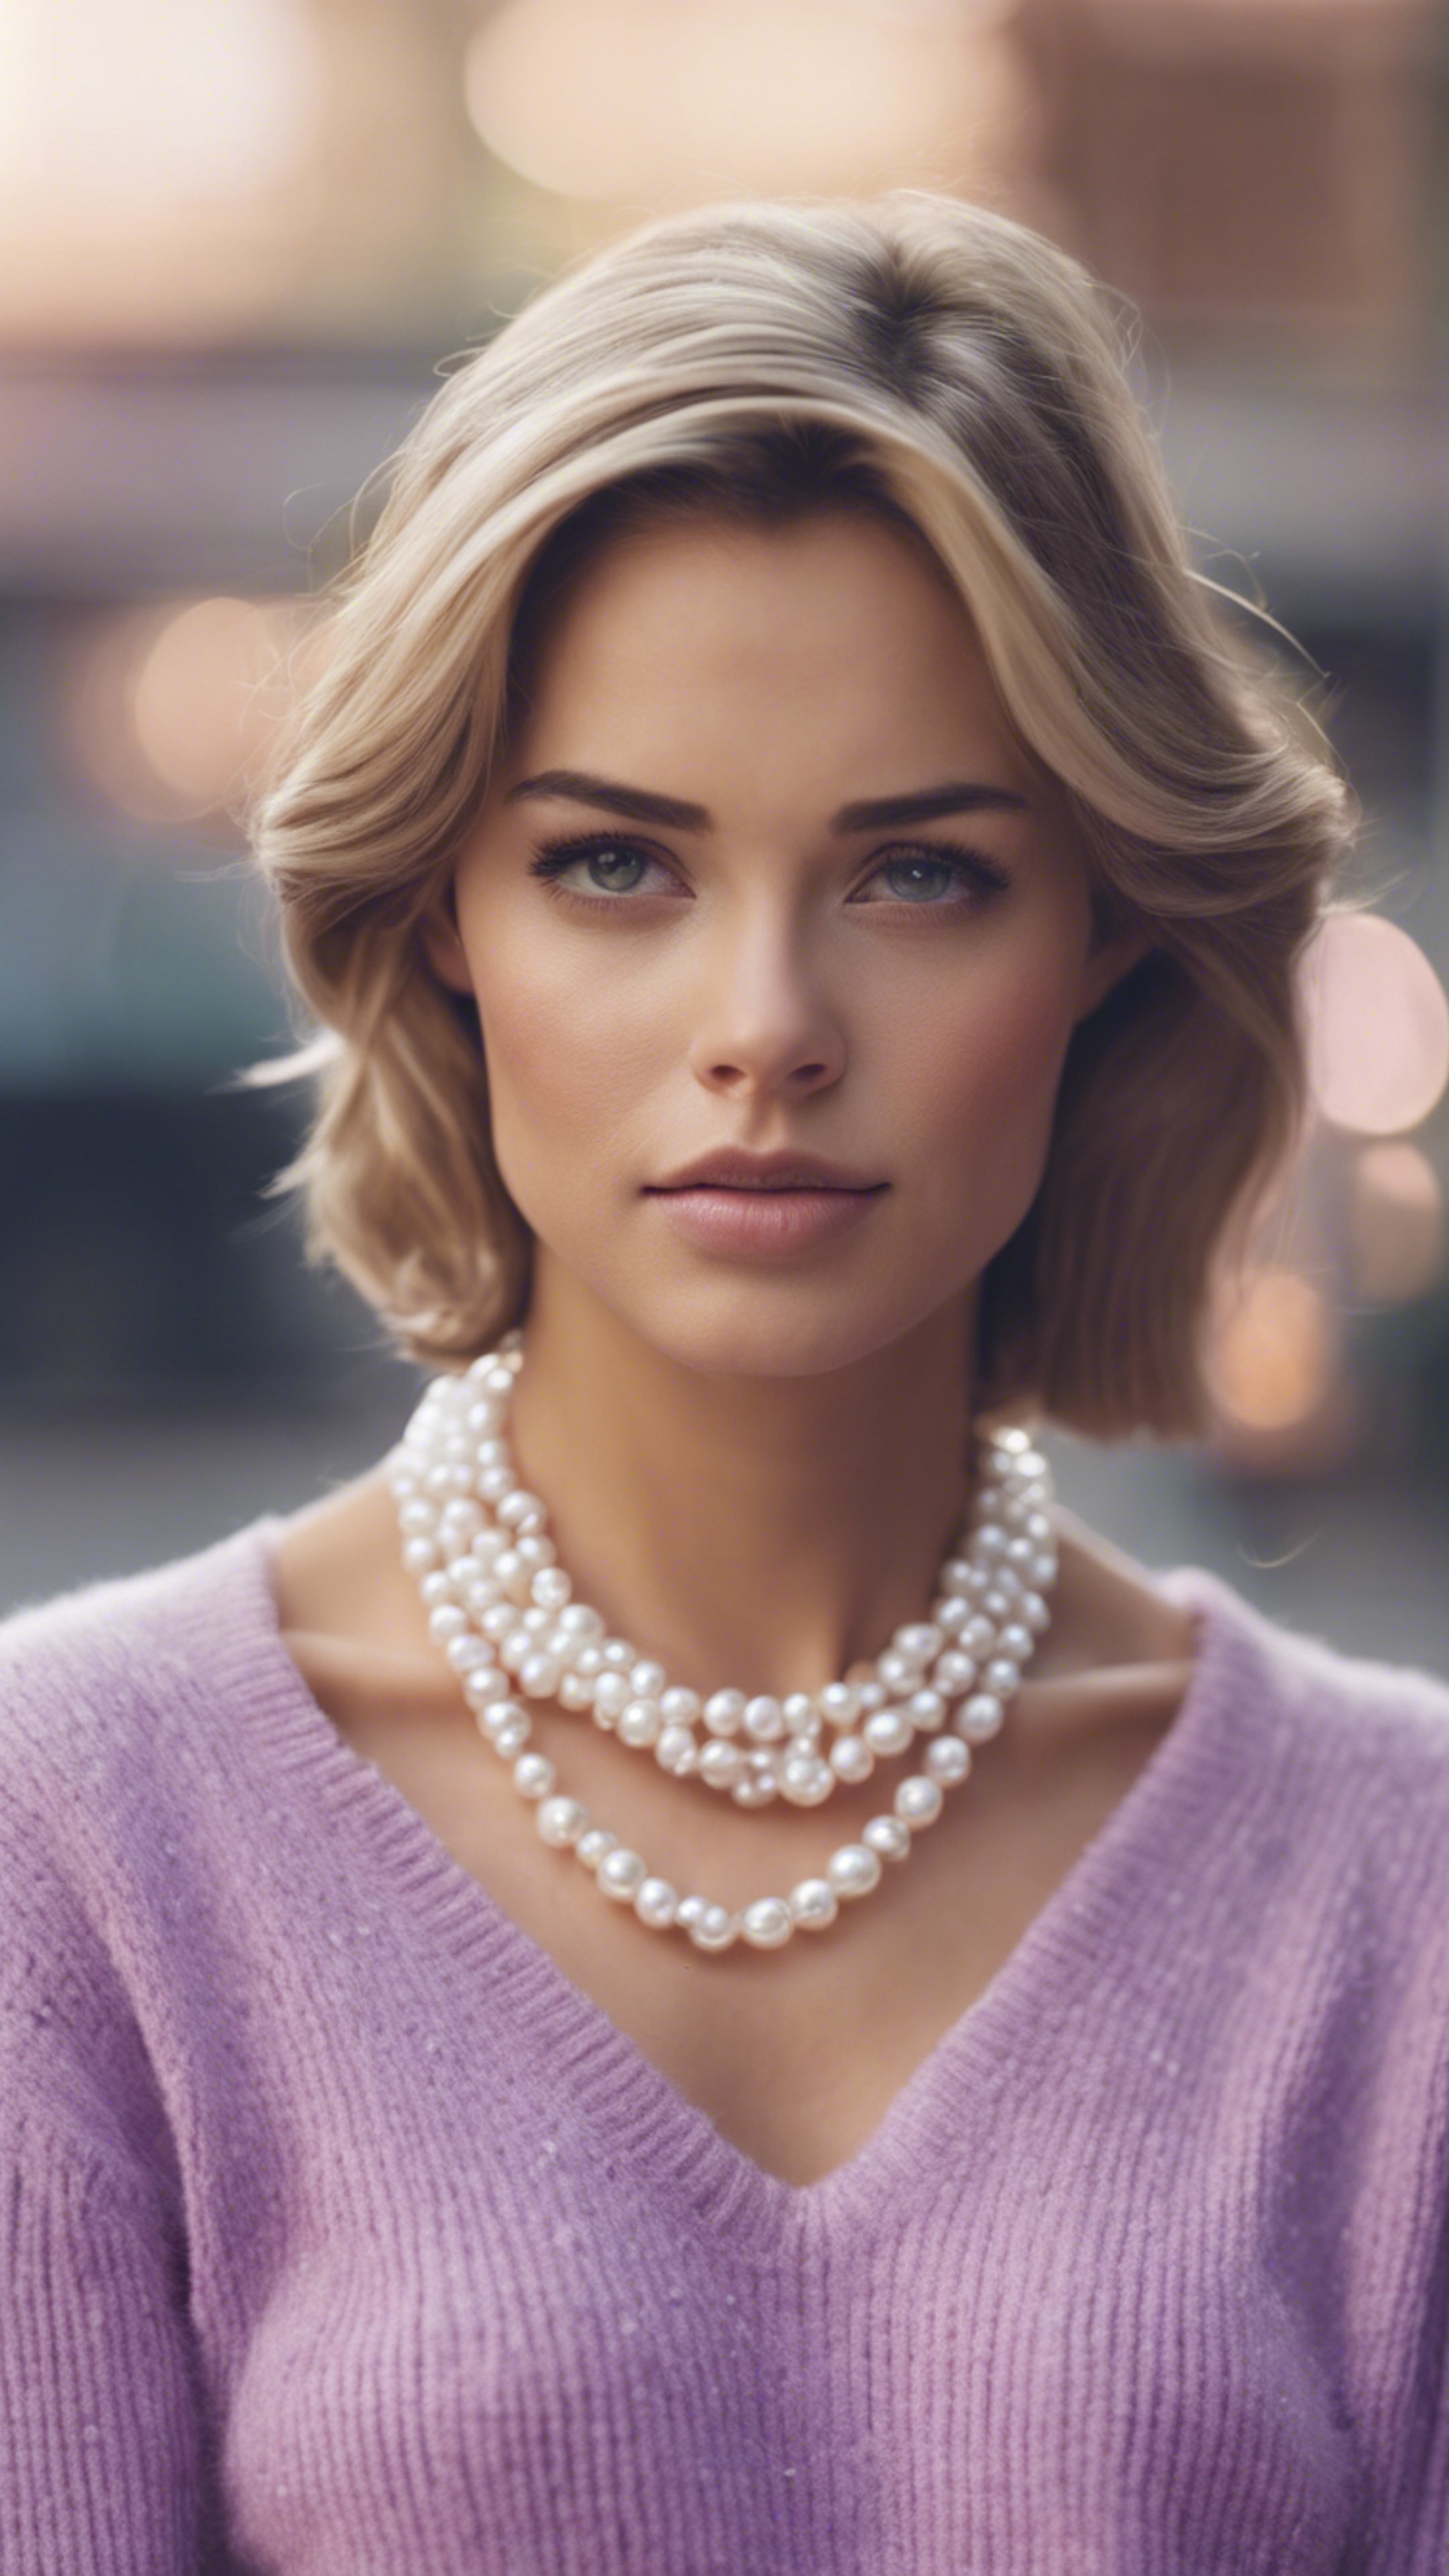 A stylish preppy woman wearing a pastel purple cashmere sweater and pearl necklace. 牆紙[eff5c75e56ed424daf90]